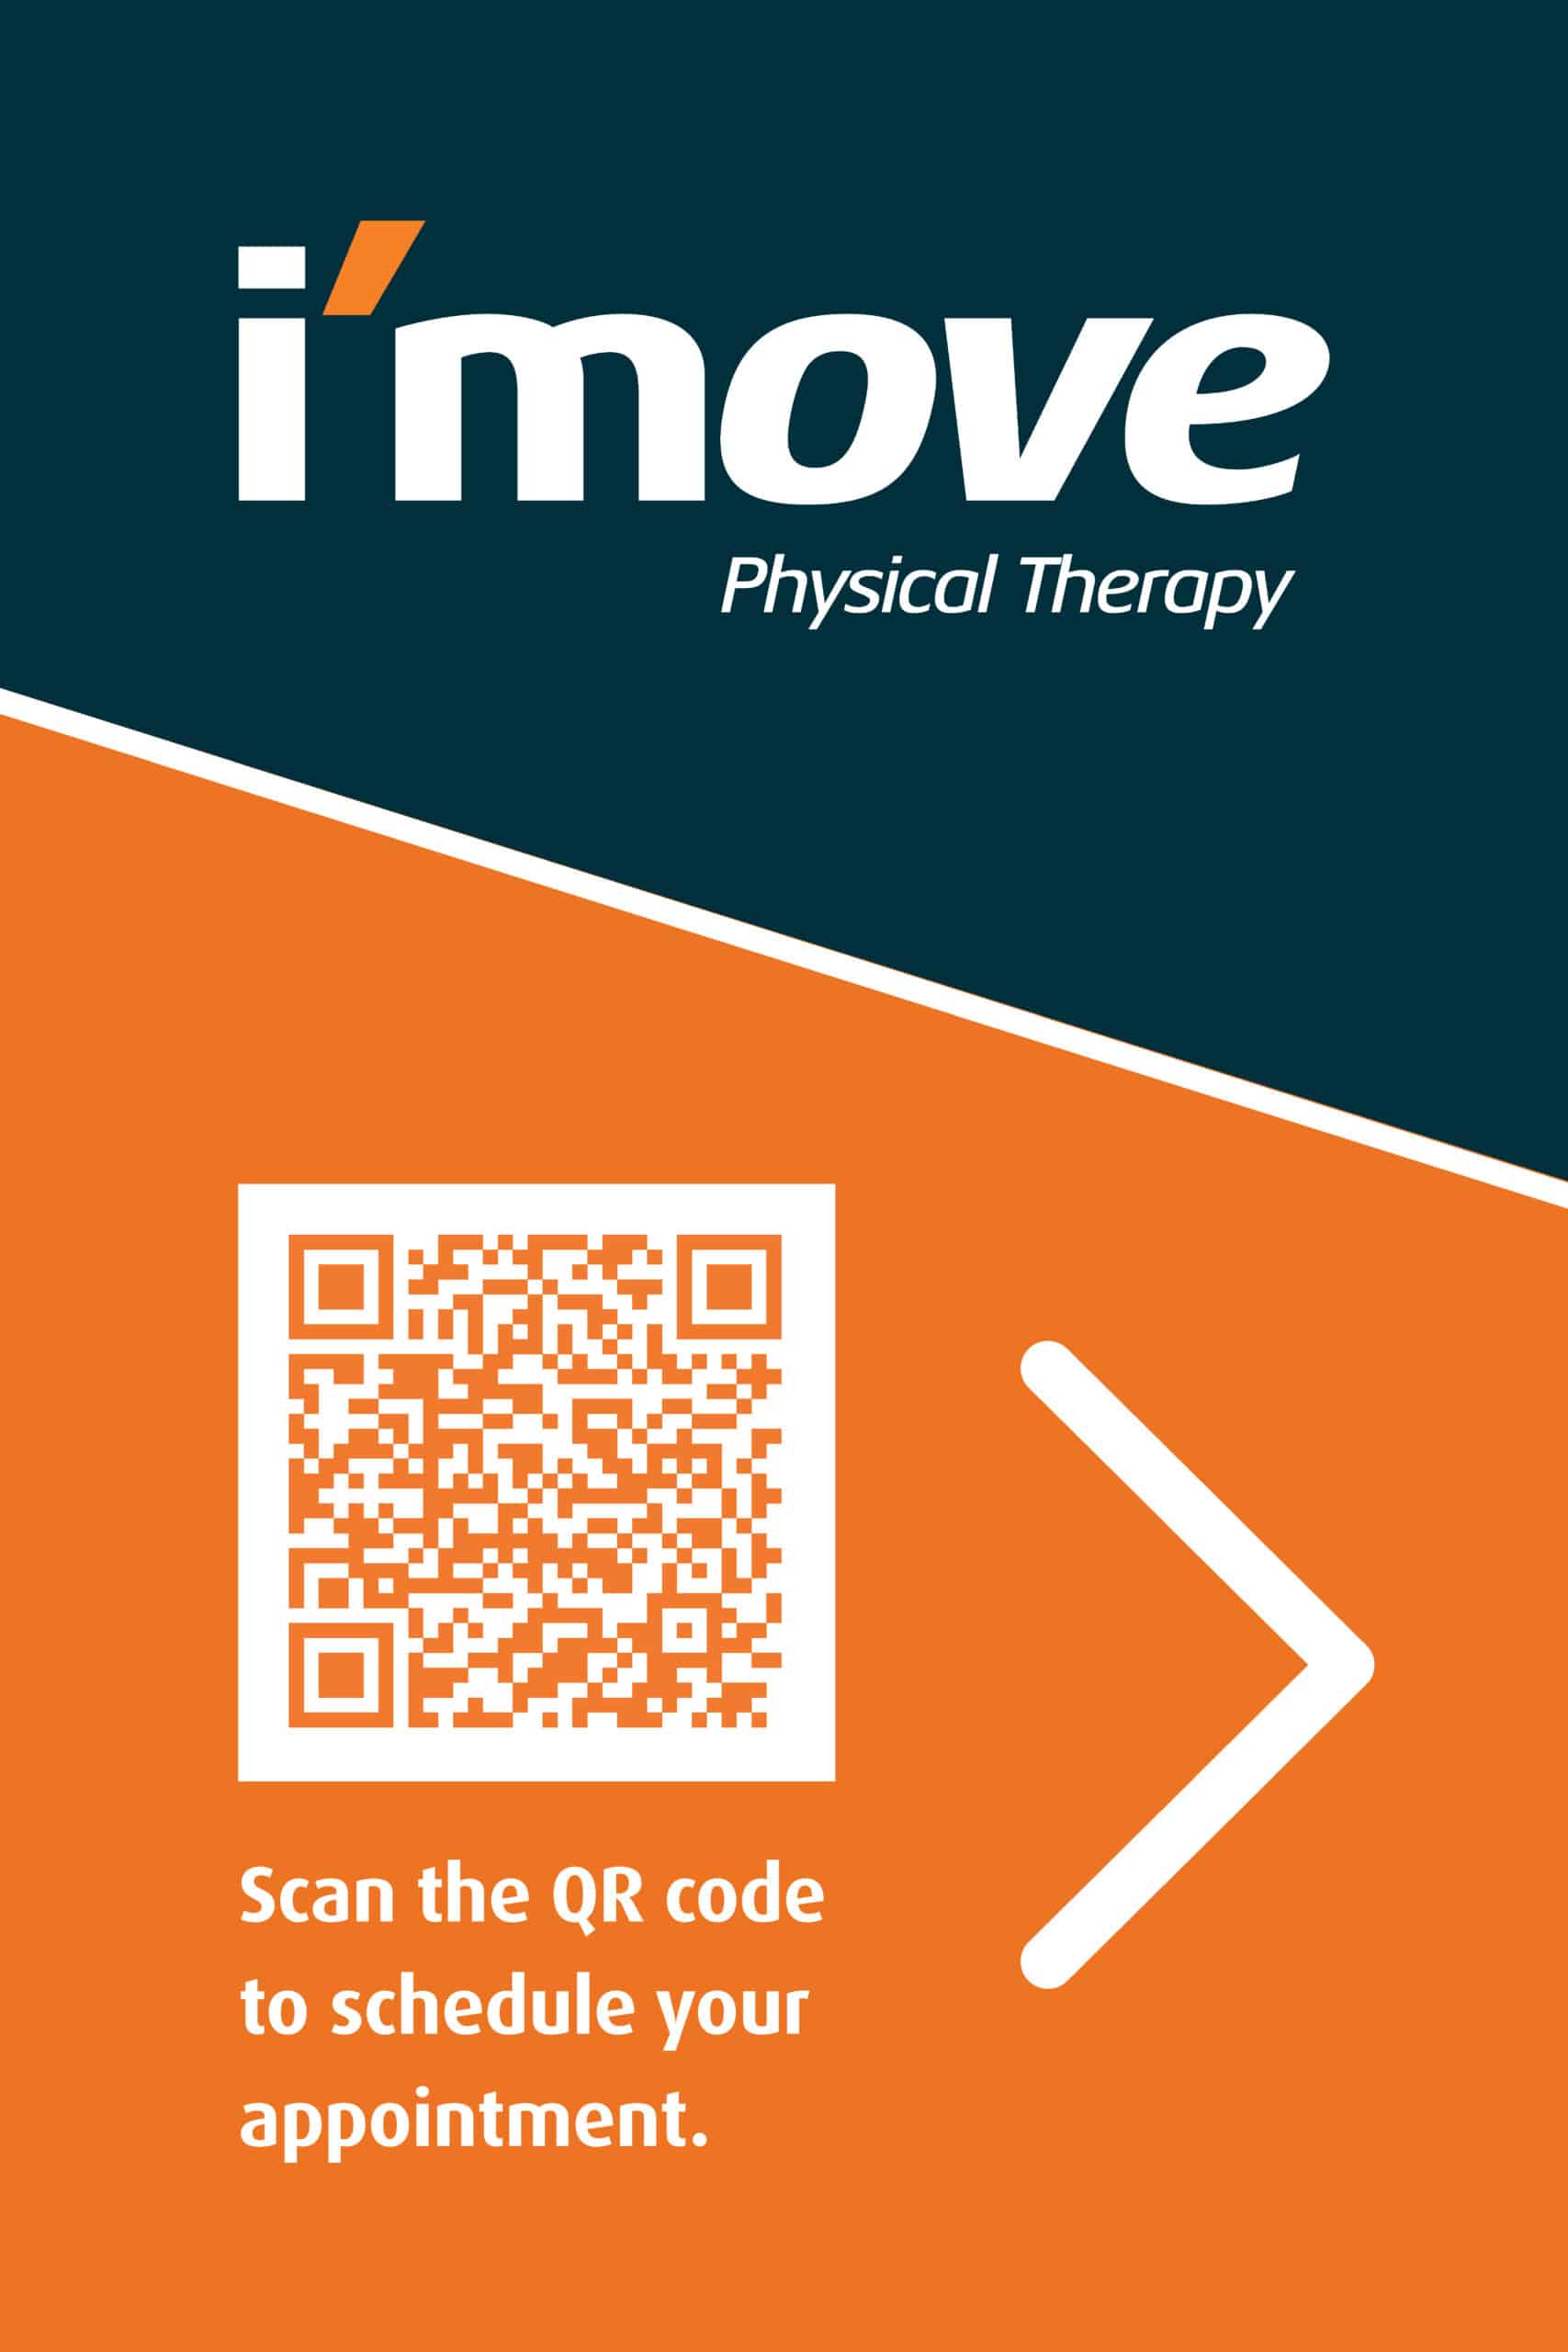 i'move: Scan QR Code to Schedule Appointment